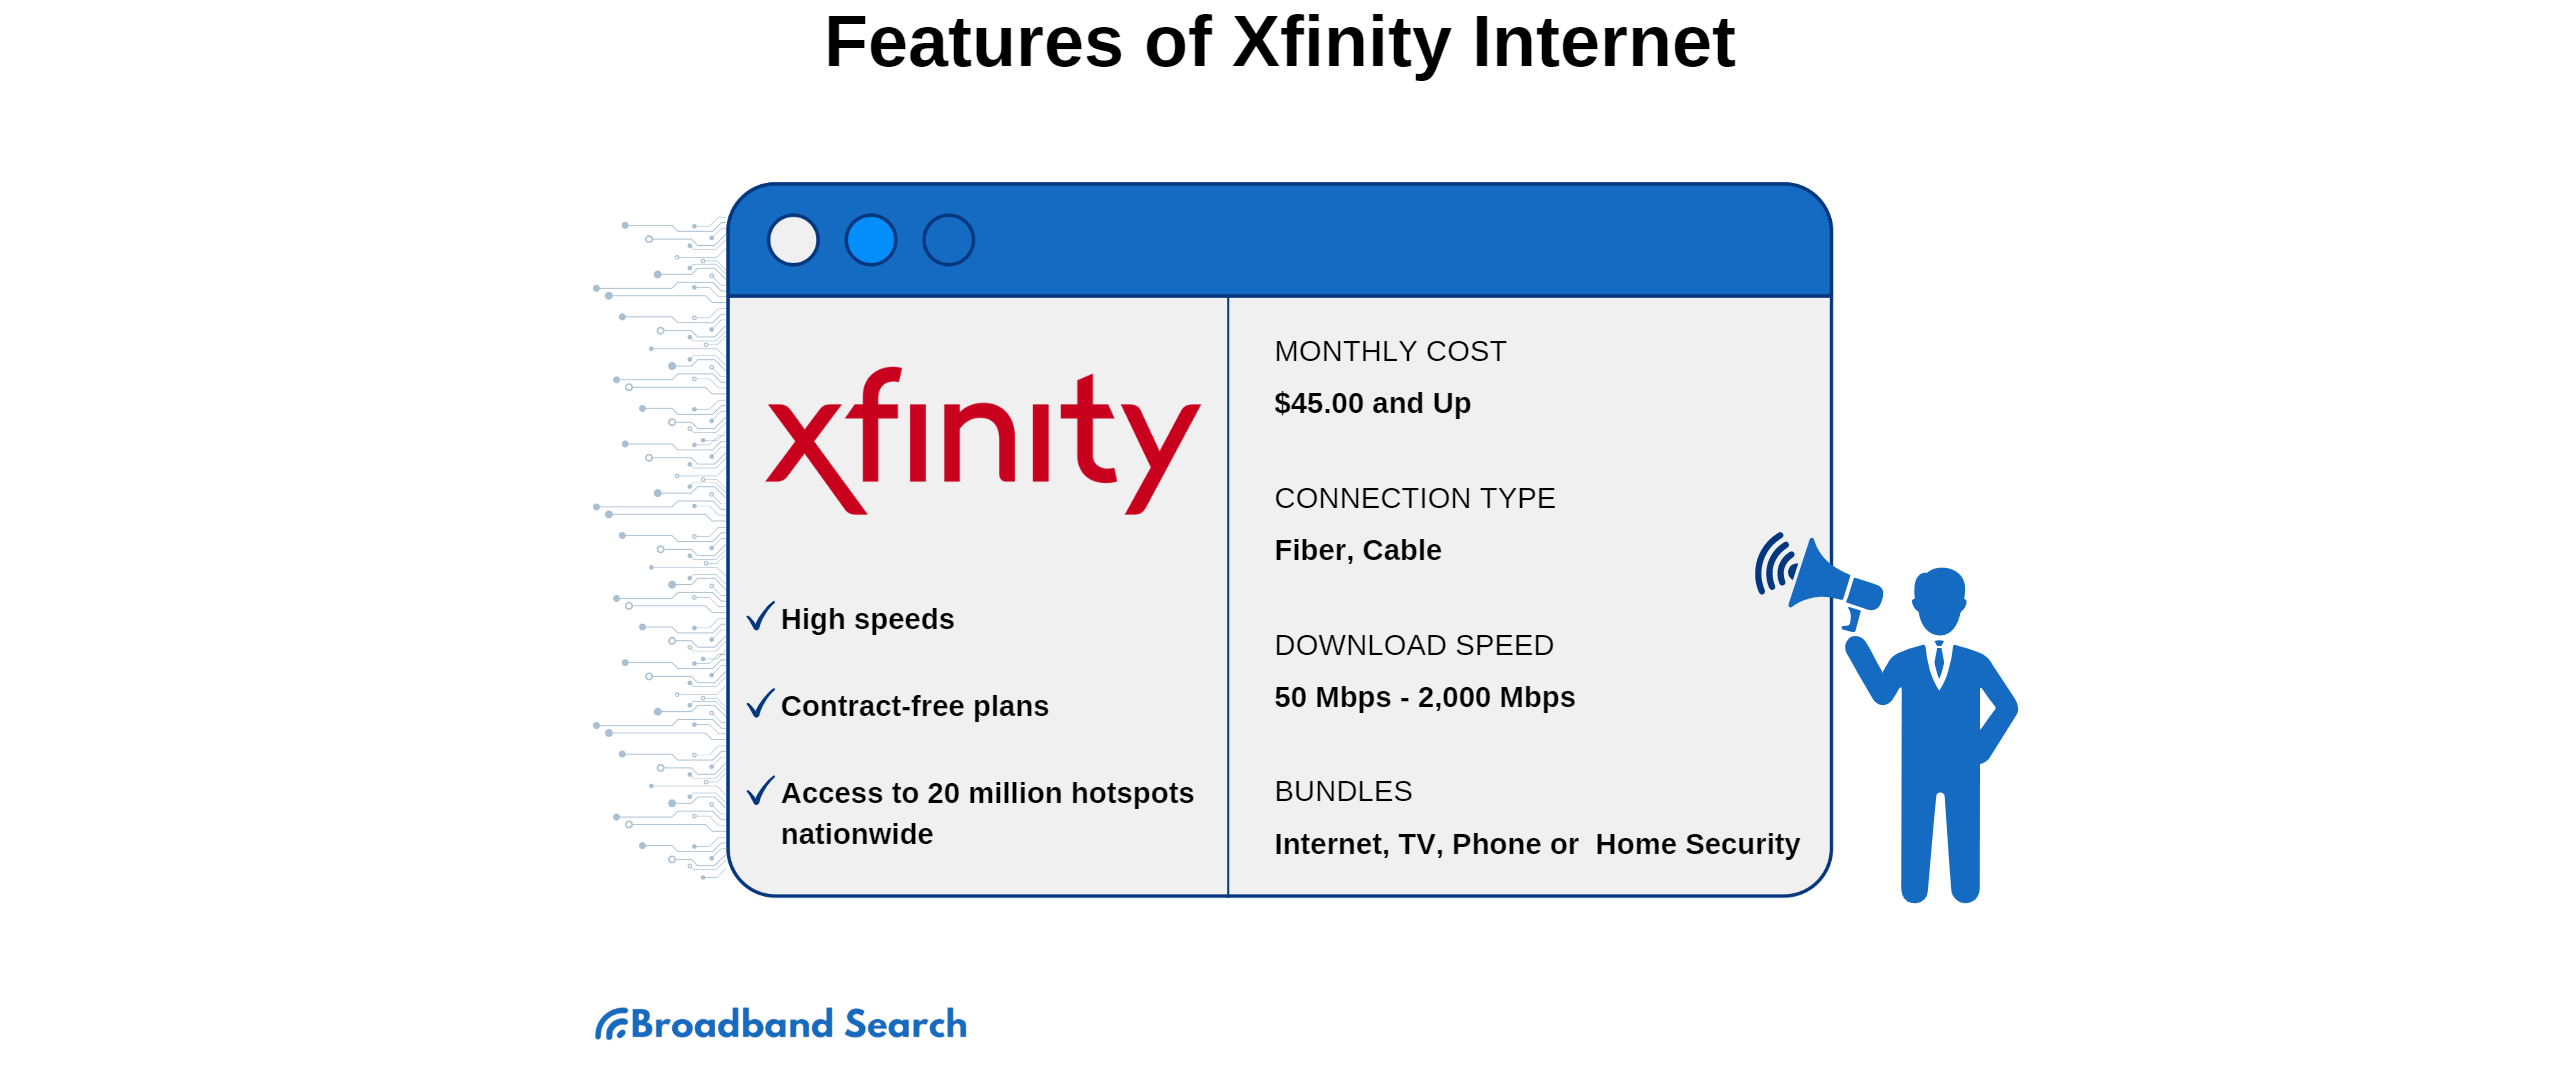 Features of Xfinity internet